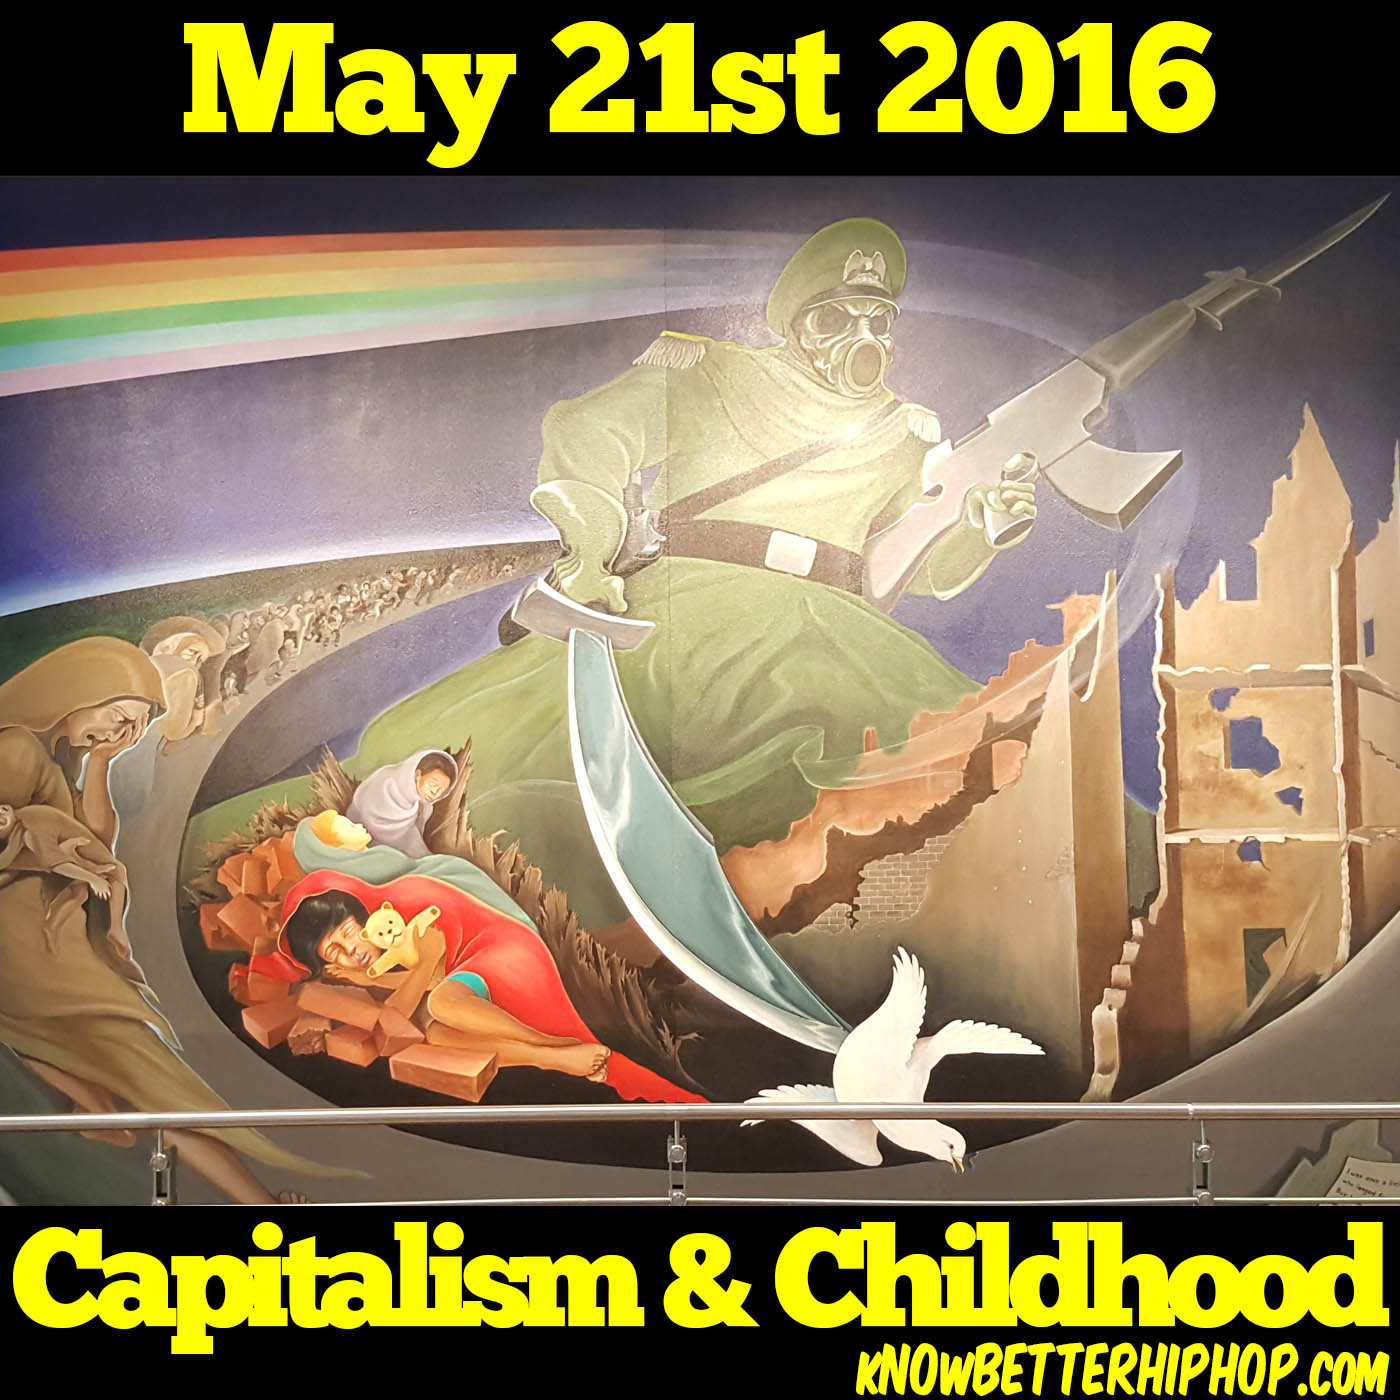 5-21-16 OUR show Capitalism and Childhood